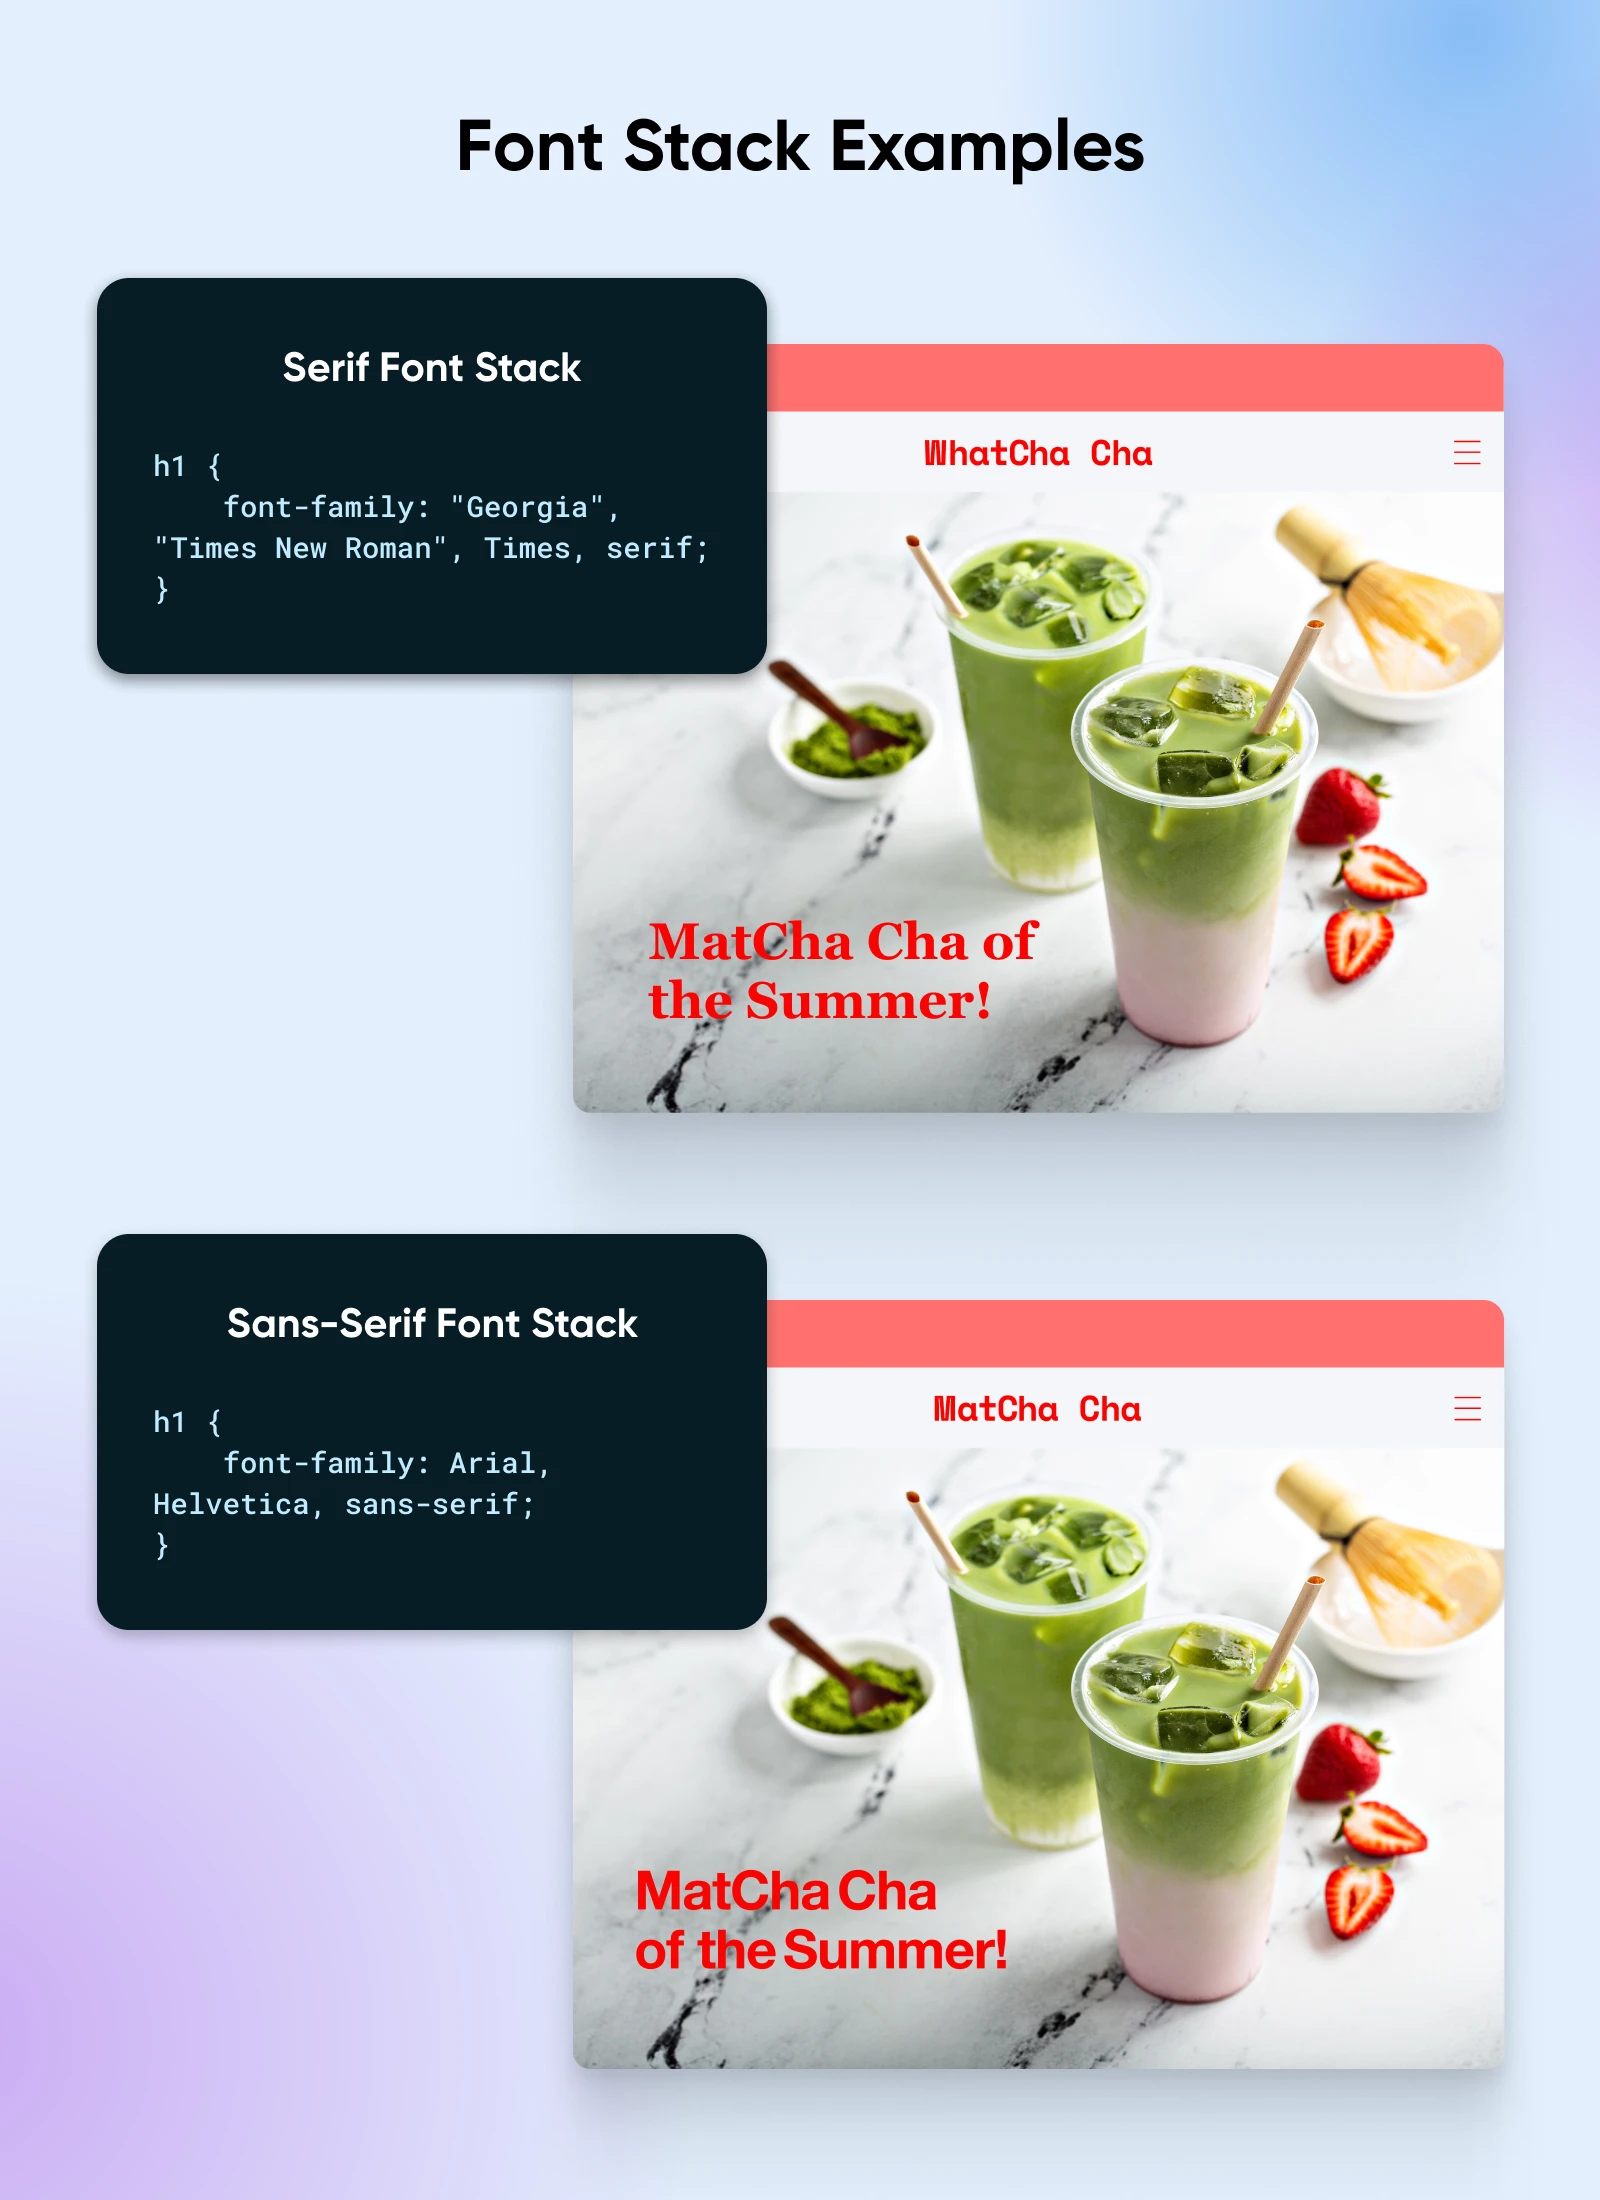 Code examples of serif and sans-serif font stacks next to images of matcha drinks with the text "MatCha Cha of the Summer!"